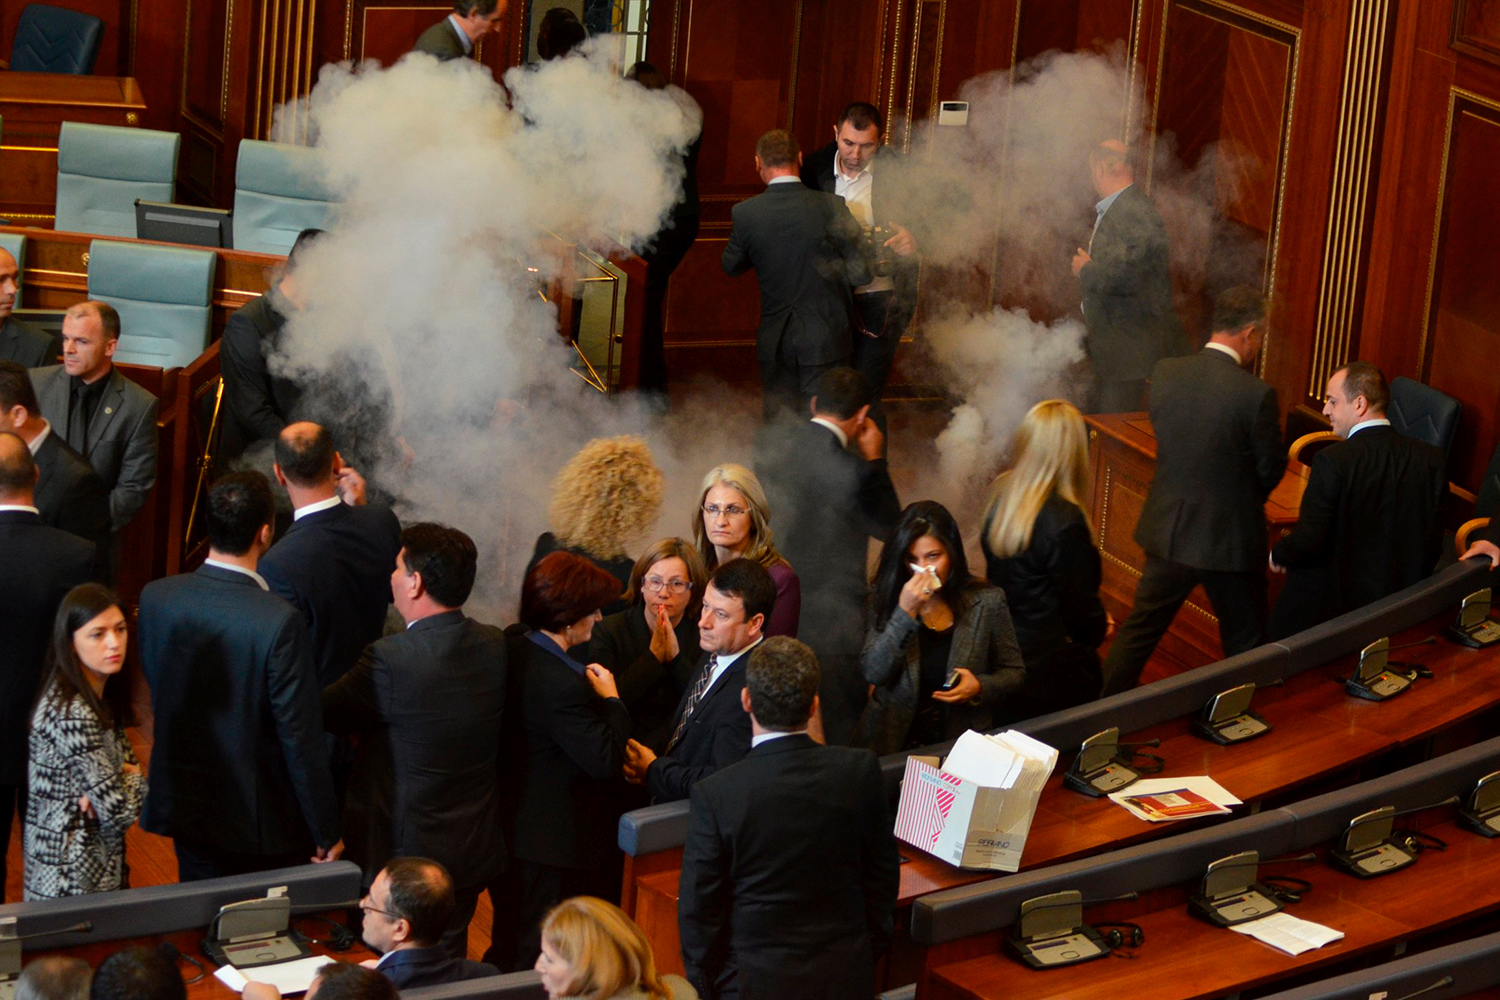 Opposition fires tear gas and pepper spray in Kosovo Parliament